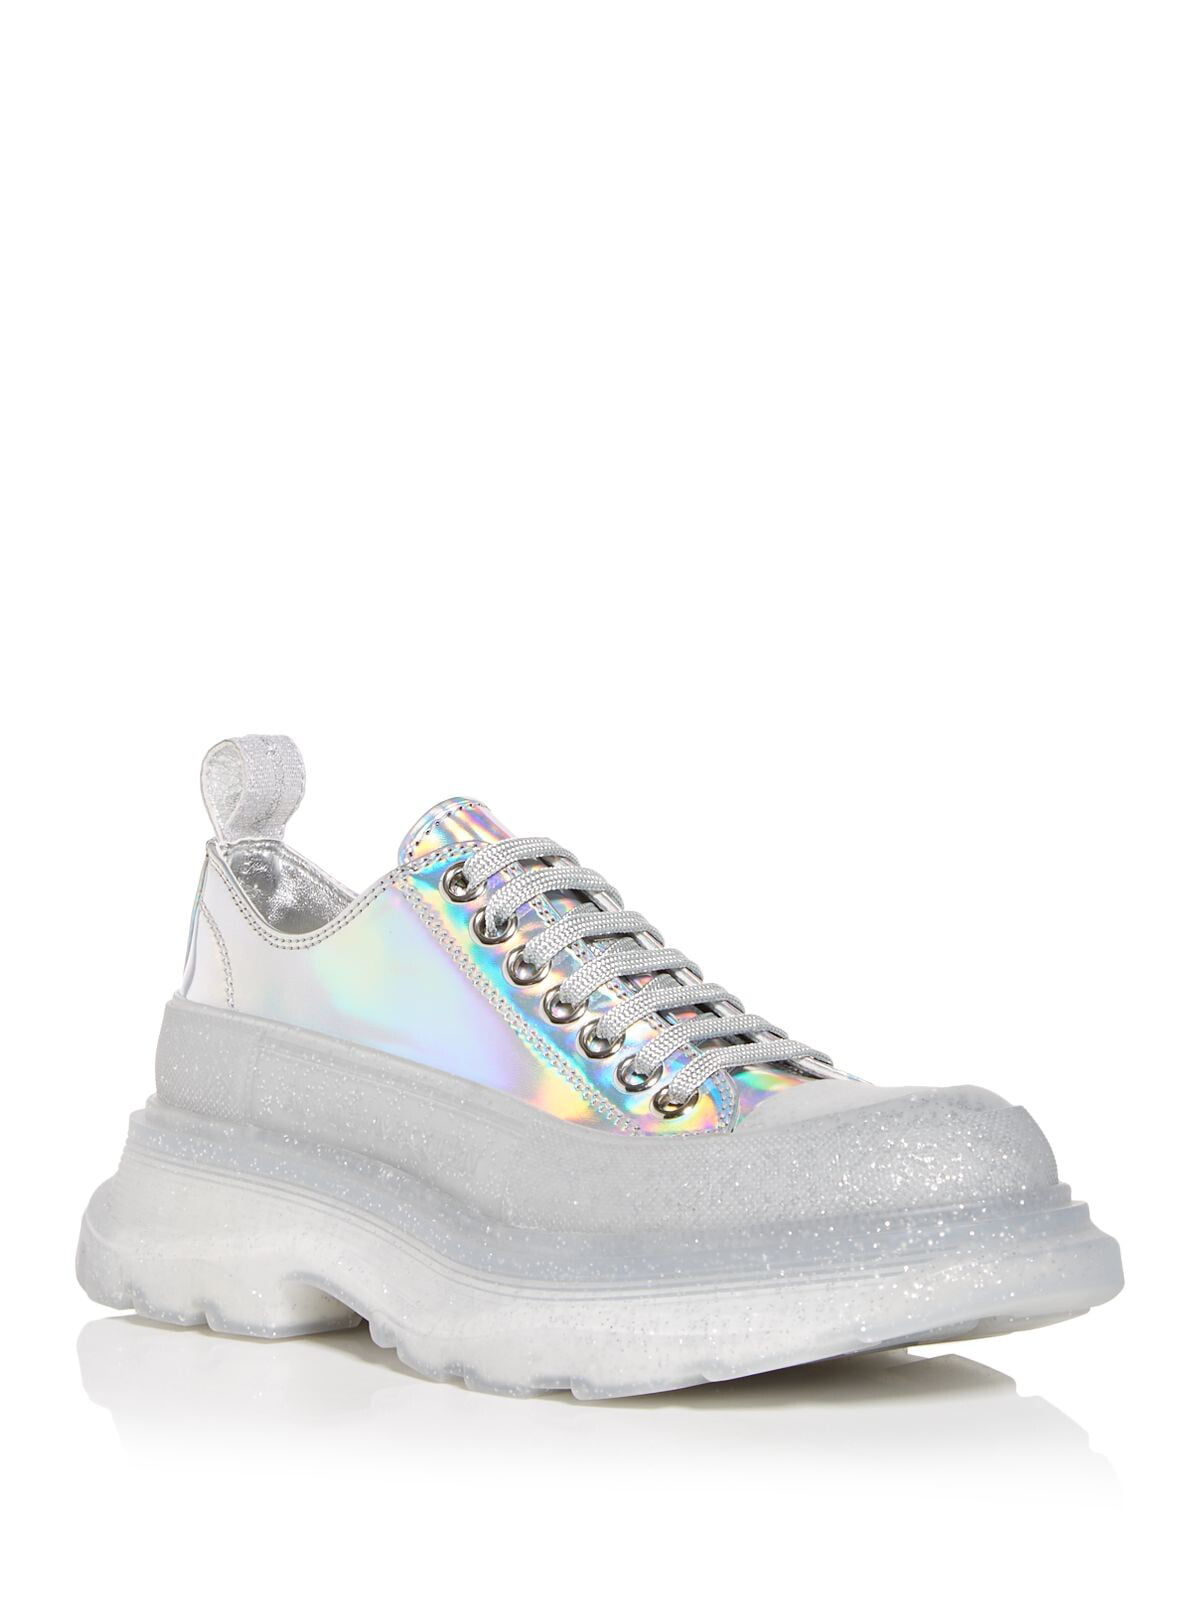 ALEXANDER MCQUEEN Womens Silver Iridescent Translucent Pull-Tab Glitter  Logo Cap Toe Block Heel Lace-Up Sneakers Shoes 39.5